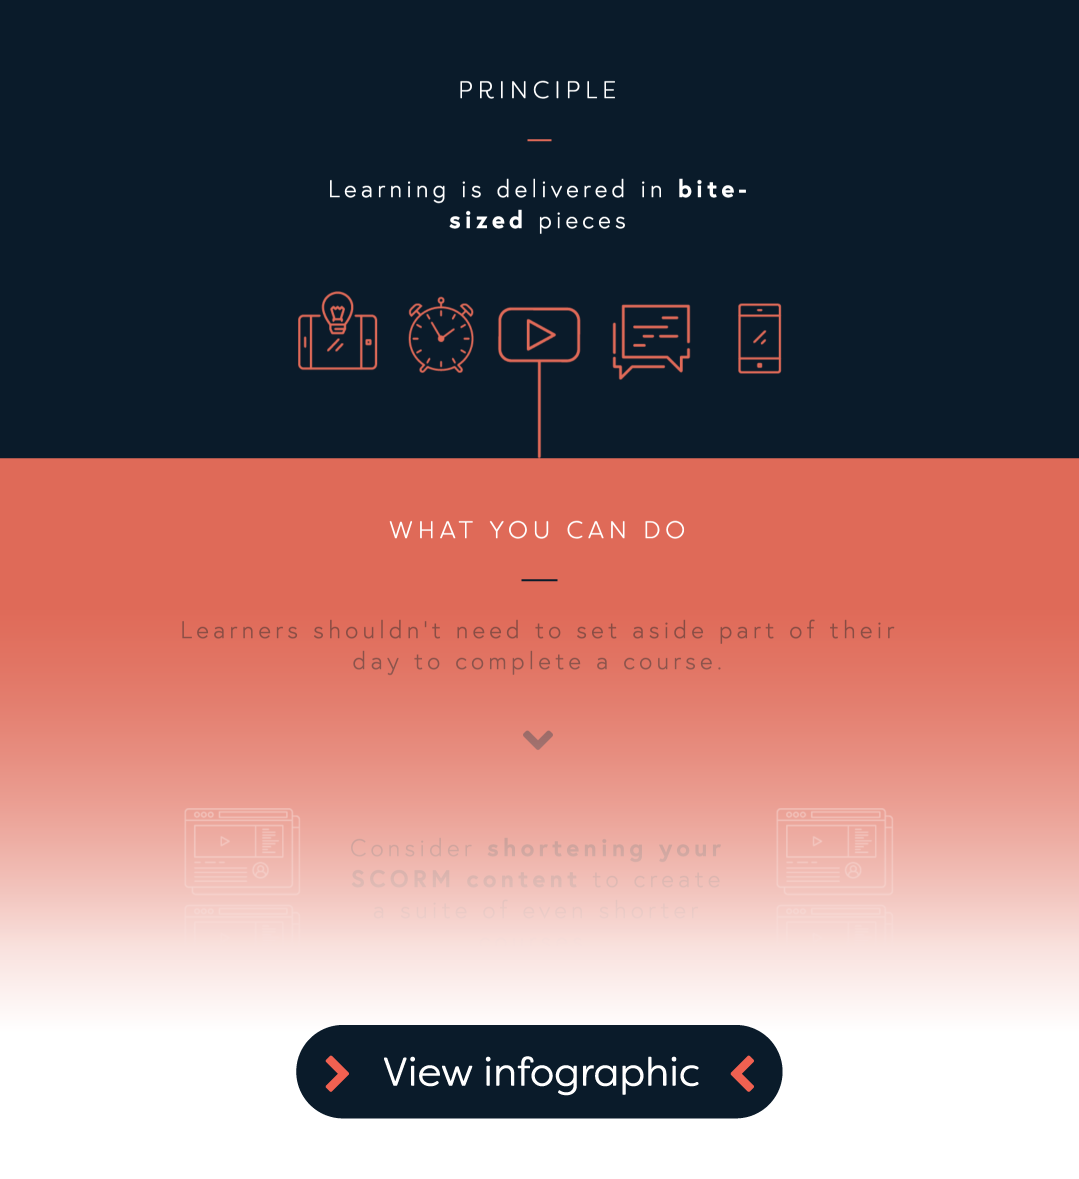 microlearning infographic